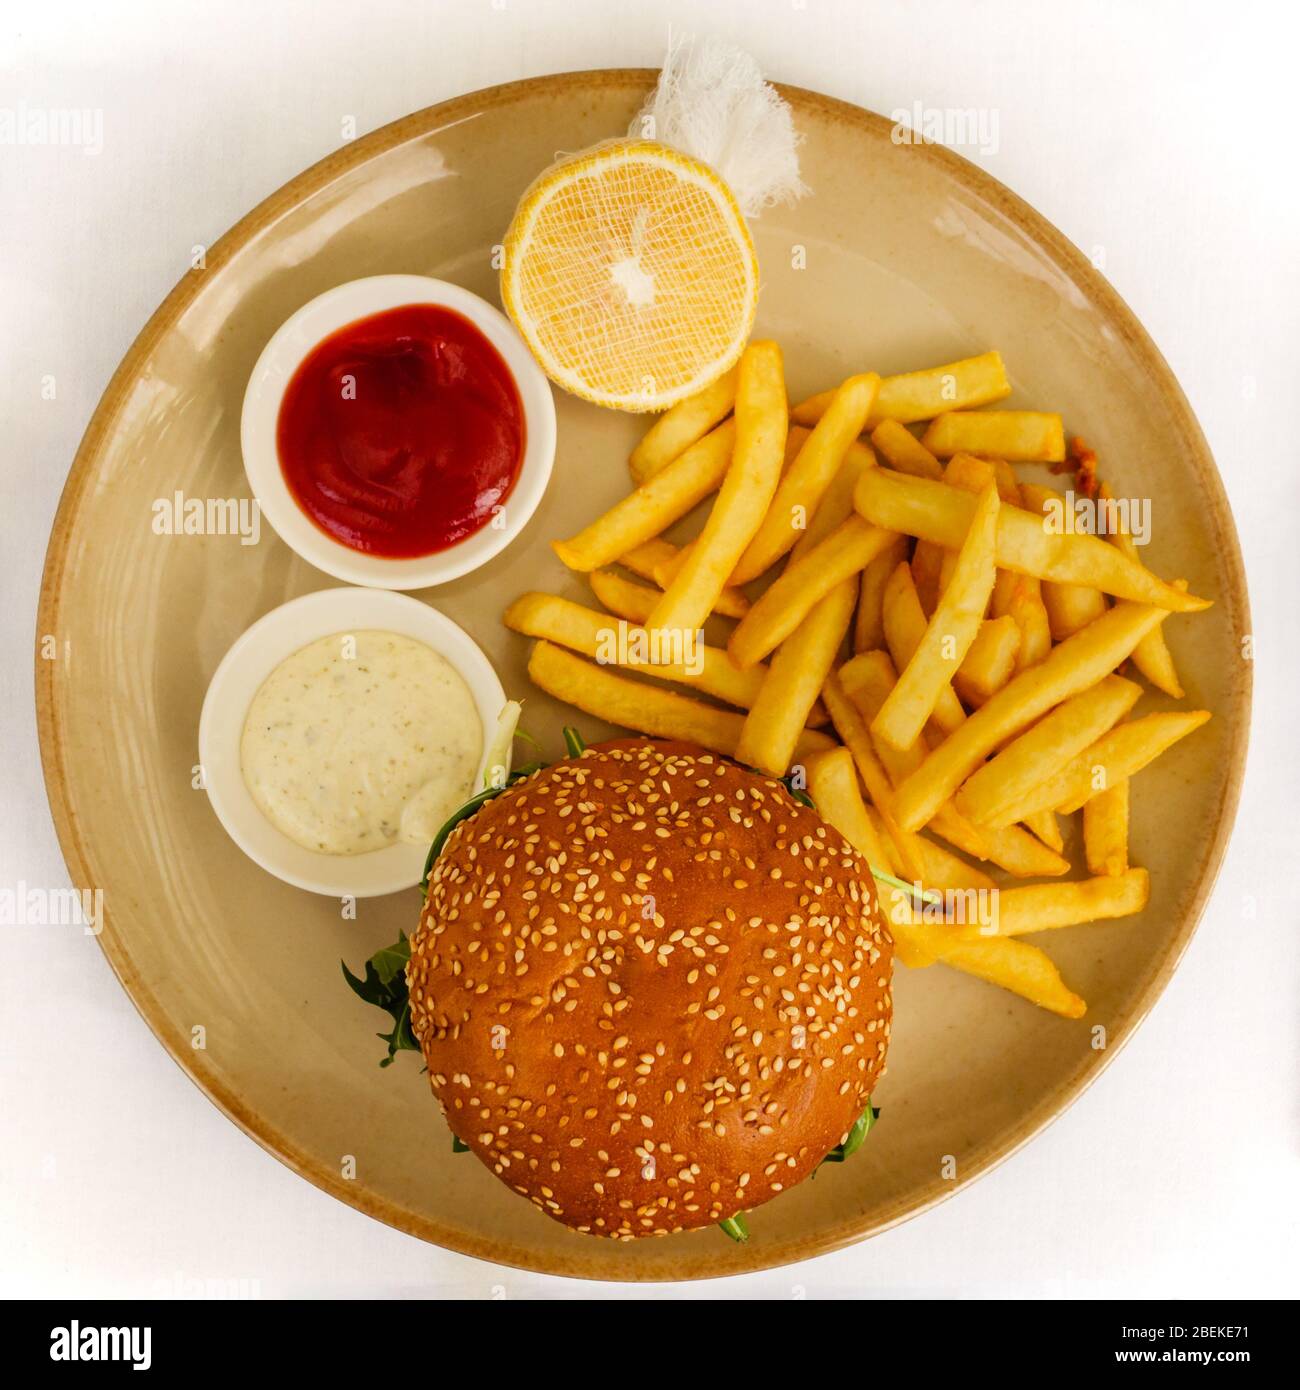 Flat lay of a burger and chips / French fries served with tomato ketchup, tartar sauce, and lemon on the side on white background Stock Photo